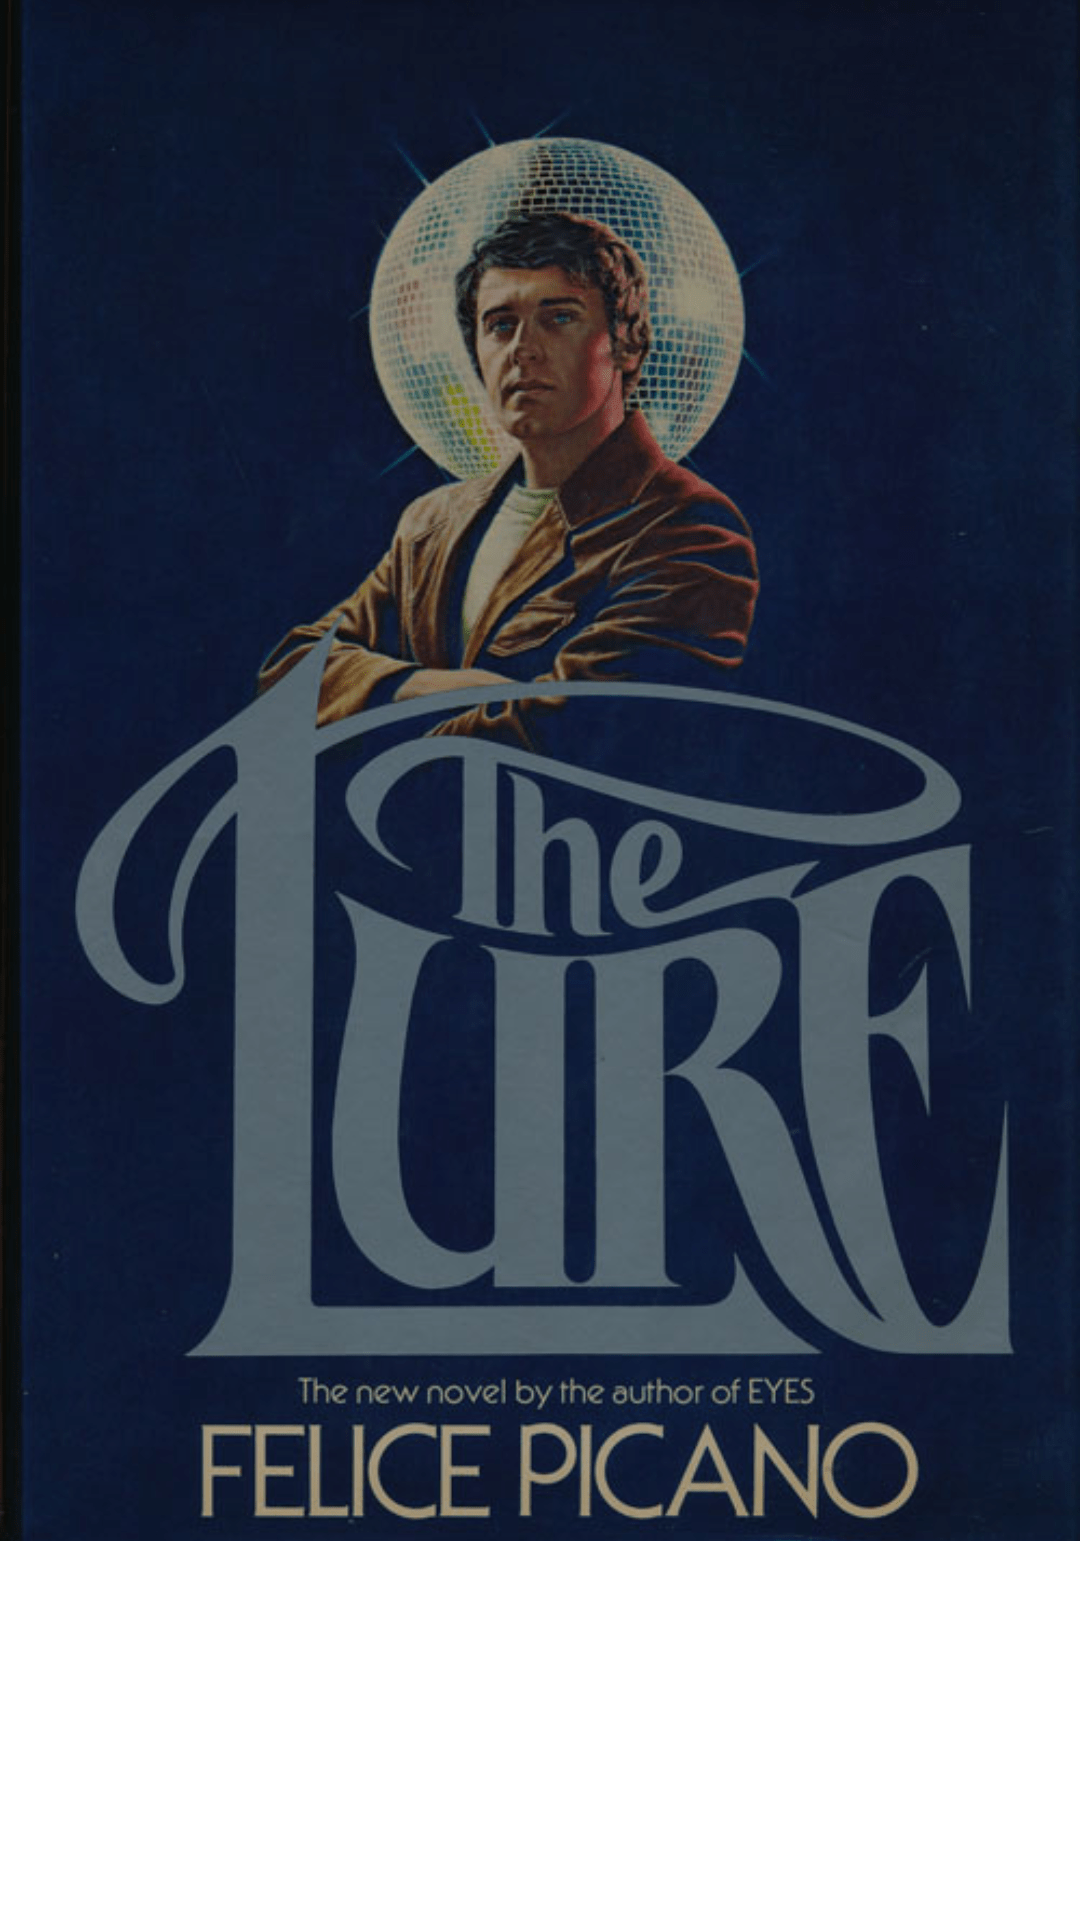 The Lure by Felice Picano